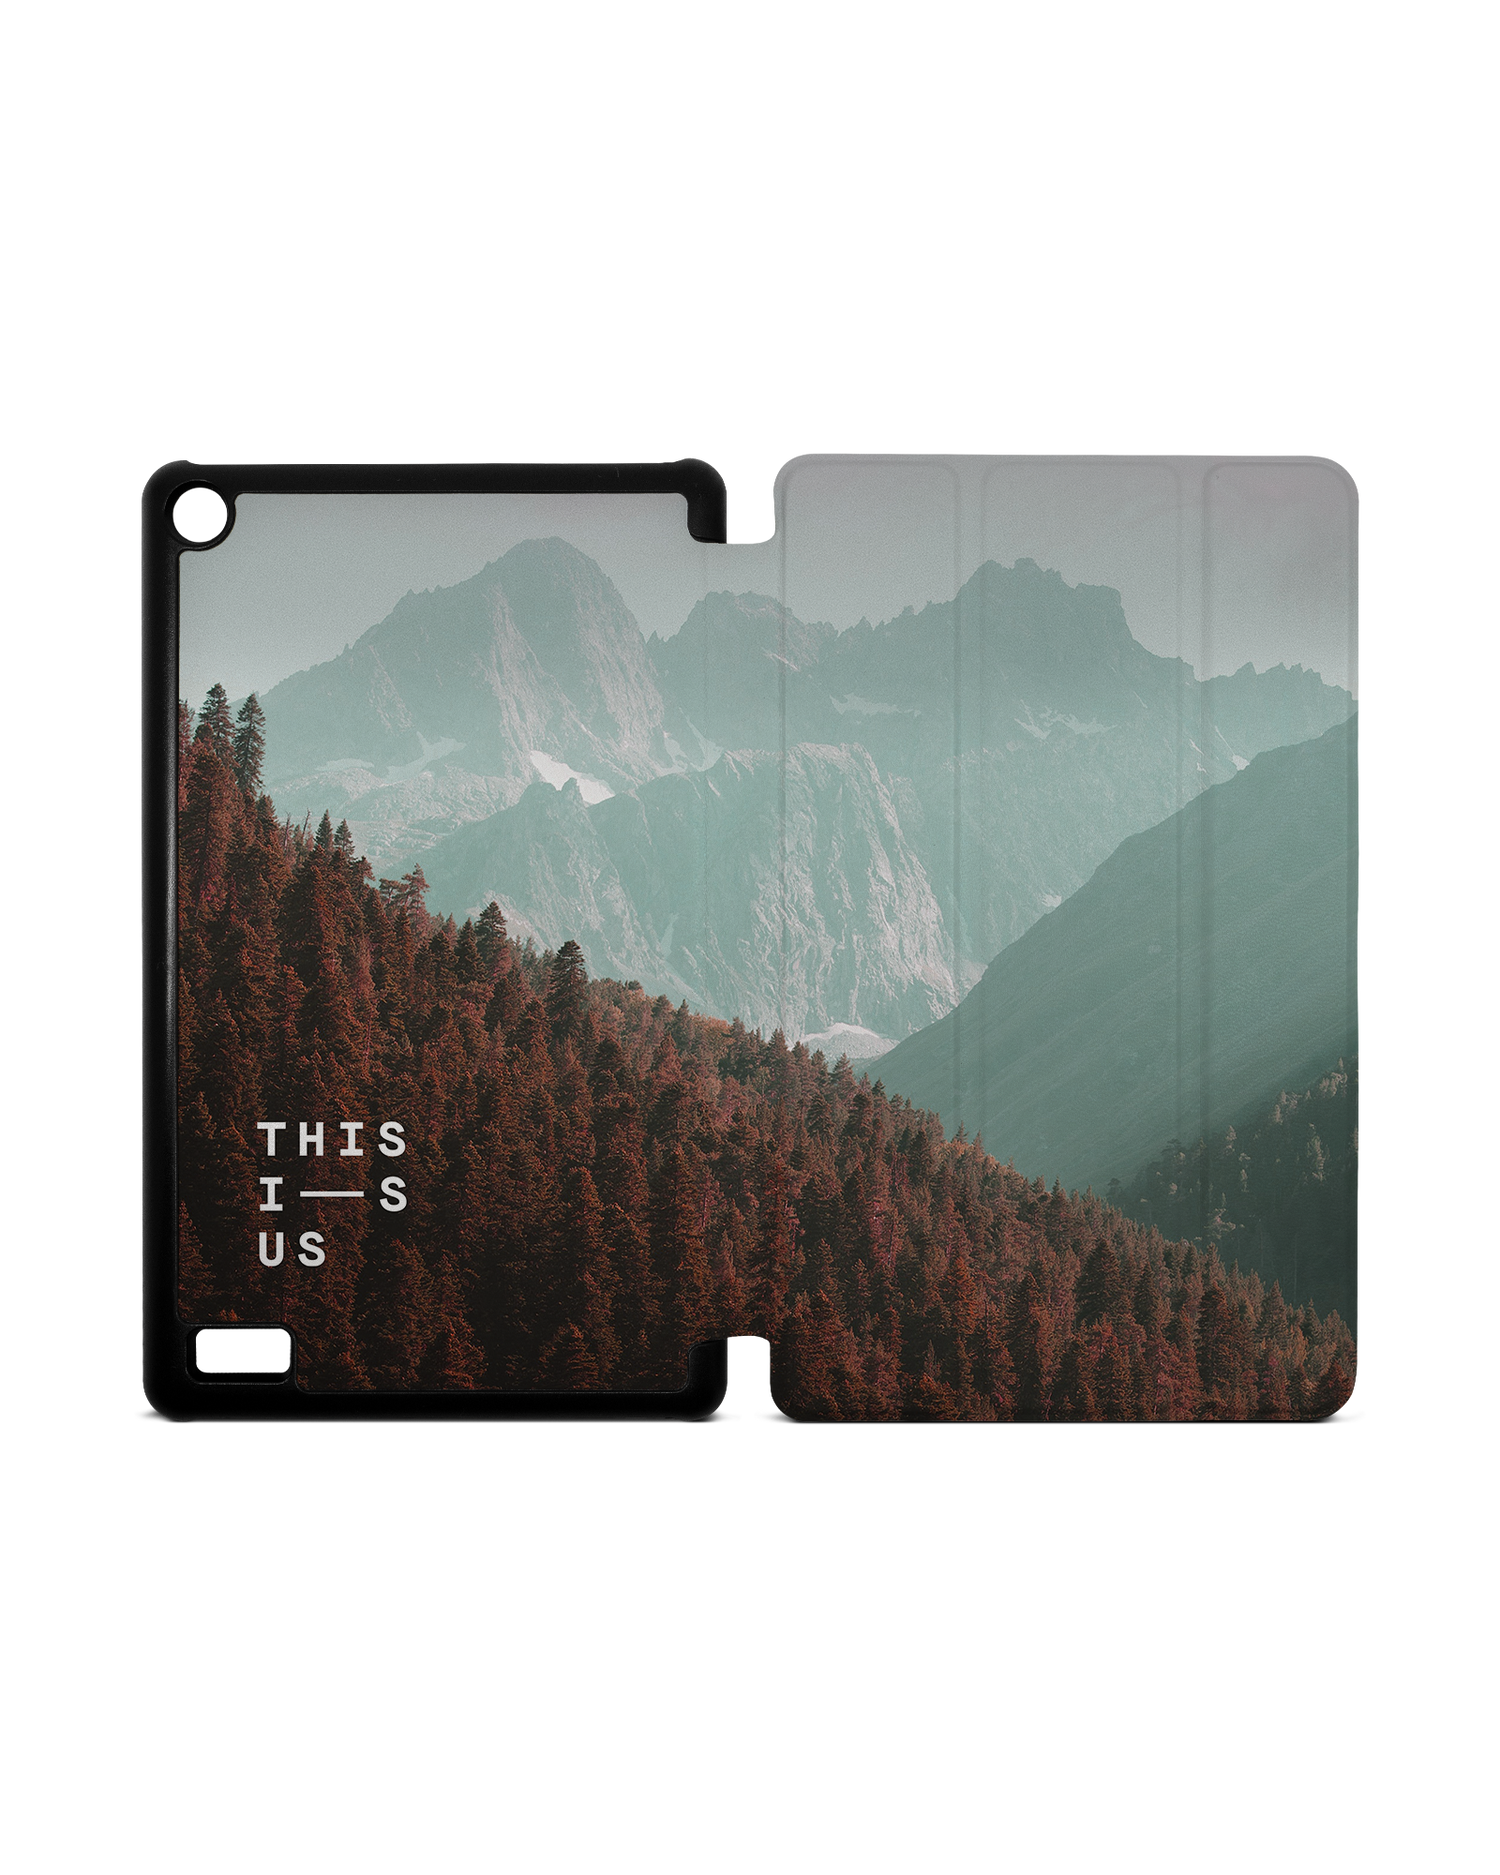 Into the Woods Tablet Smart Case for Amazon Fire 7: Opened